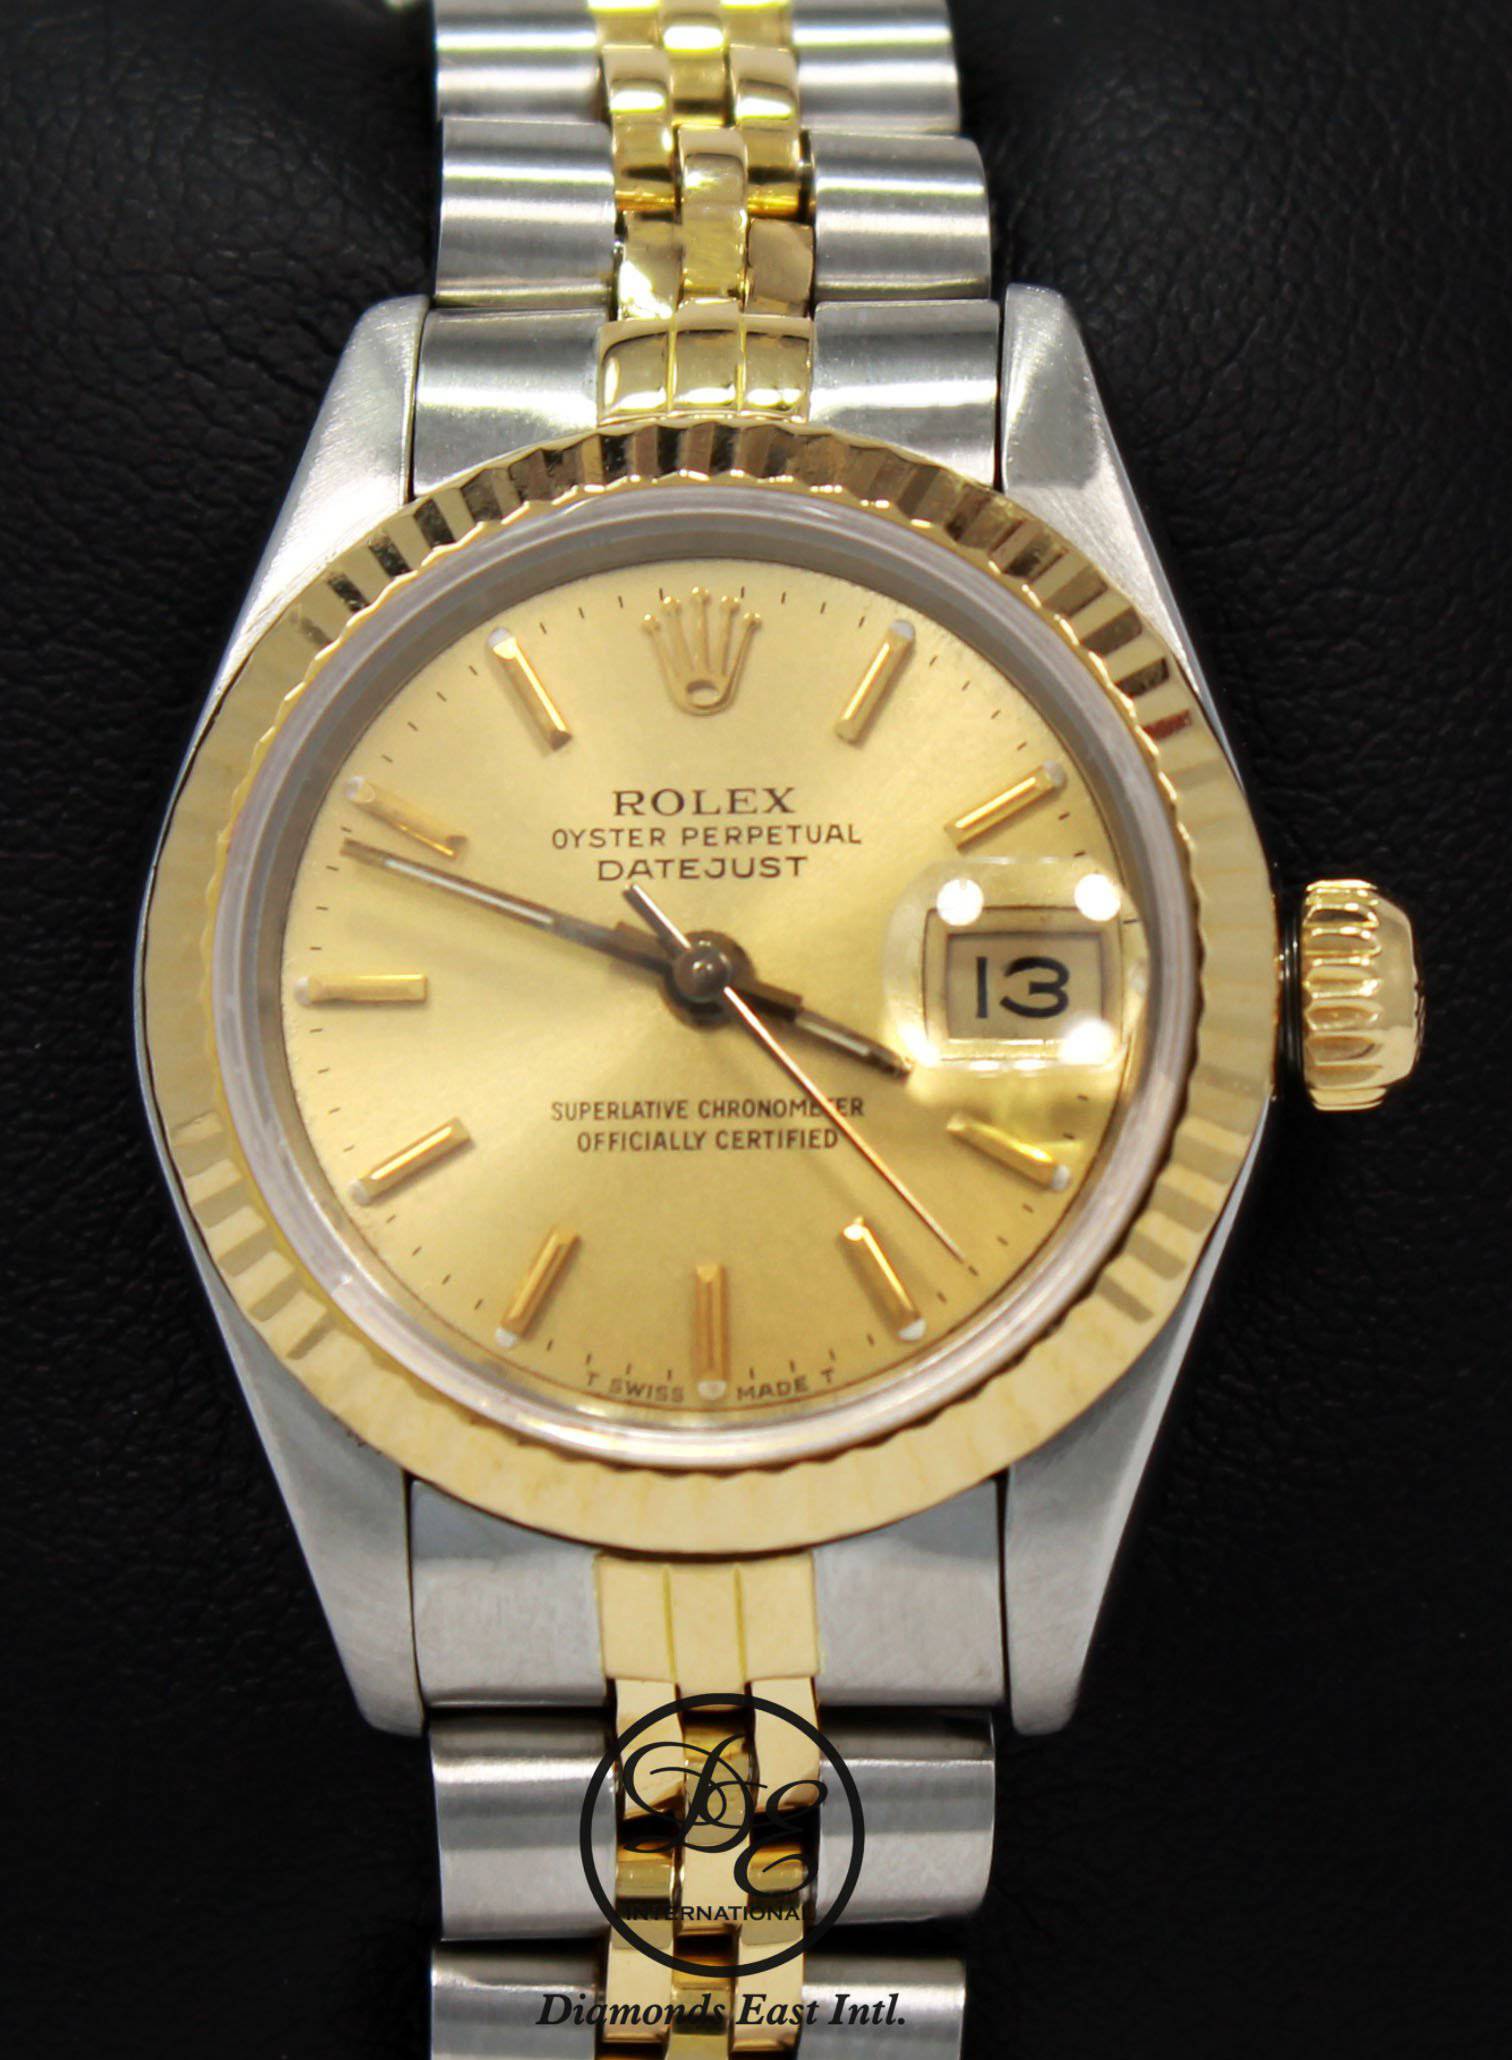 Rolex Lady Datejust 26 mm Two Tone Steel and Yellow Gold Oyster with Diamond Dial